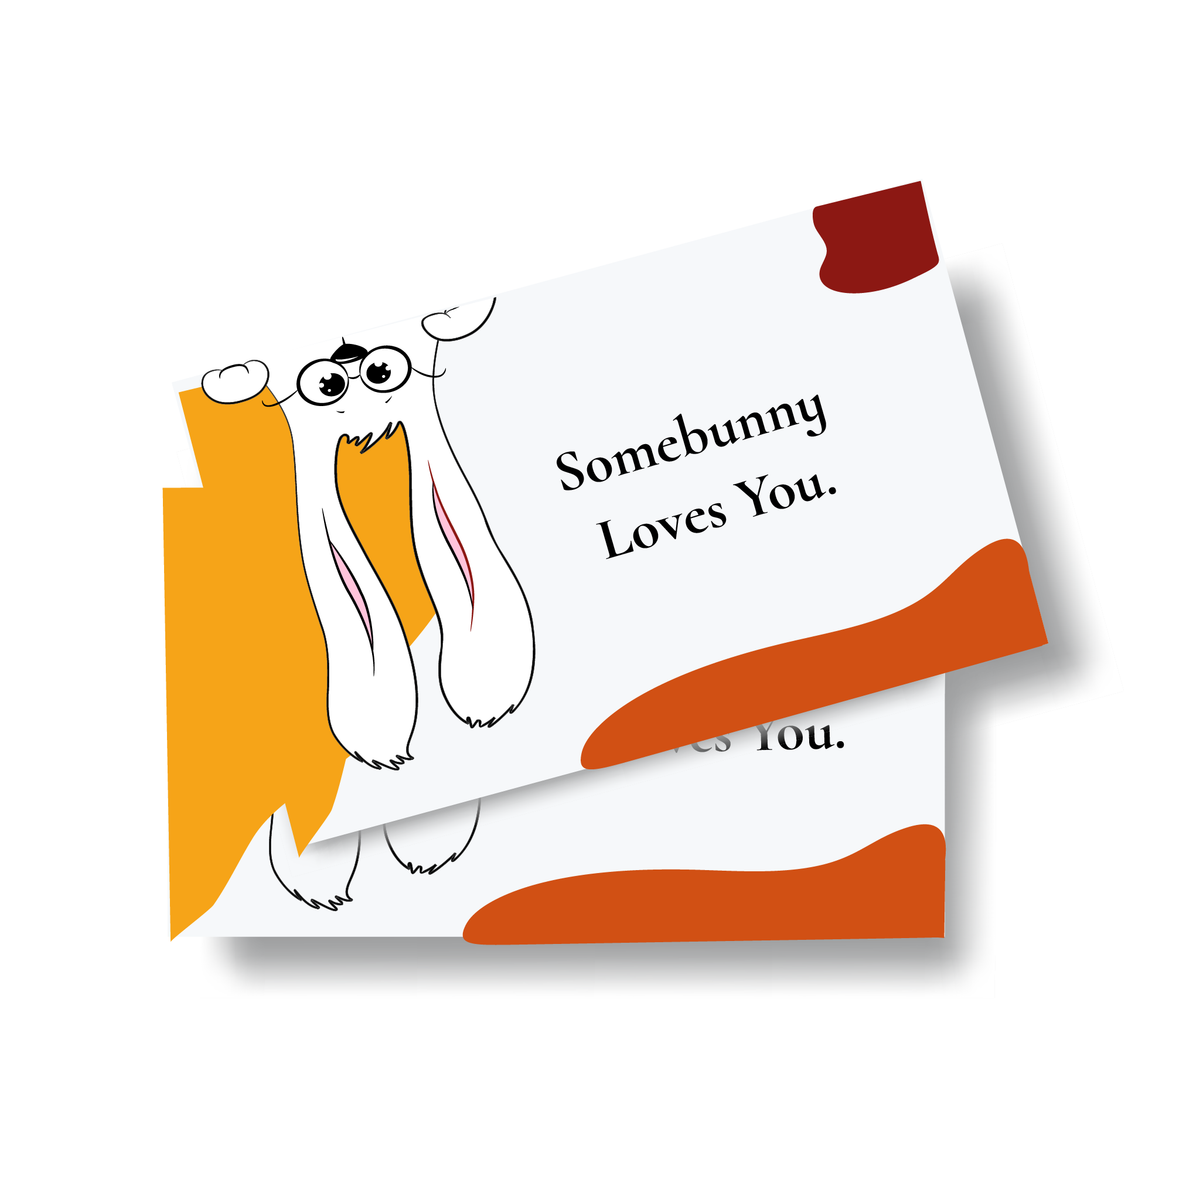 'Somebunny Loves You' Post Card